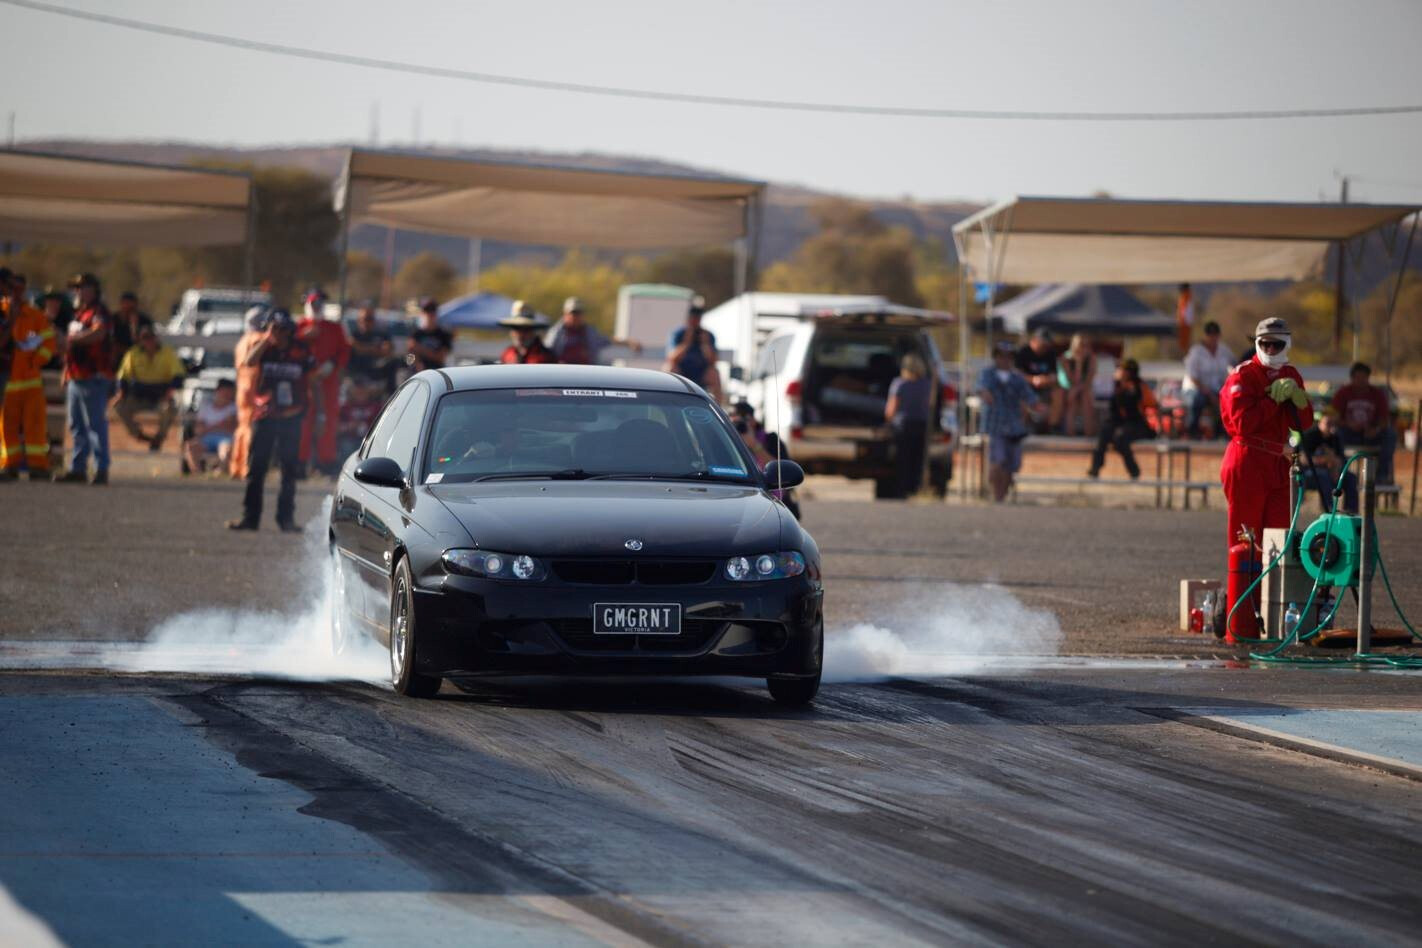 VIDEO: RED CENTRE NATS SATURDAY DRAGS